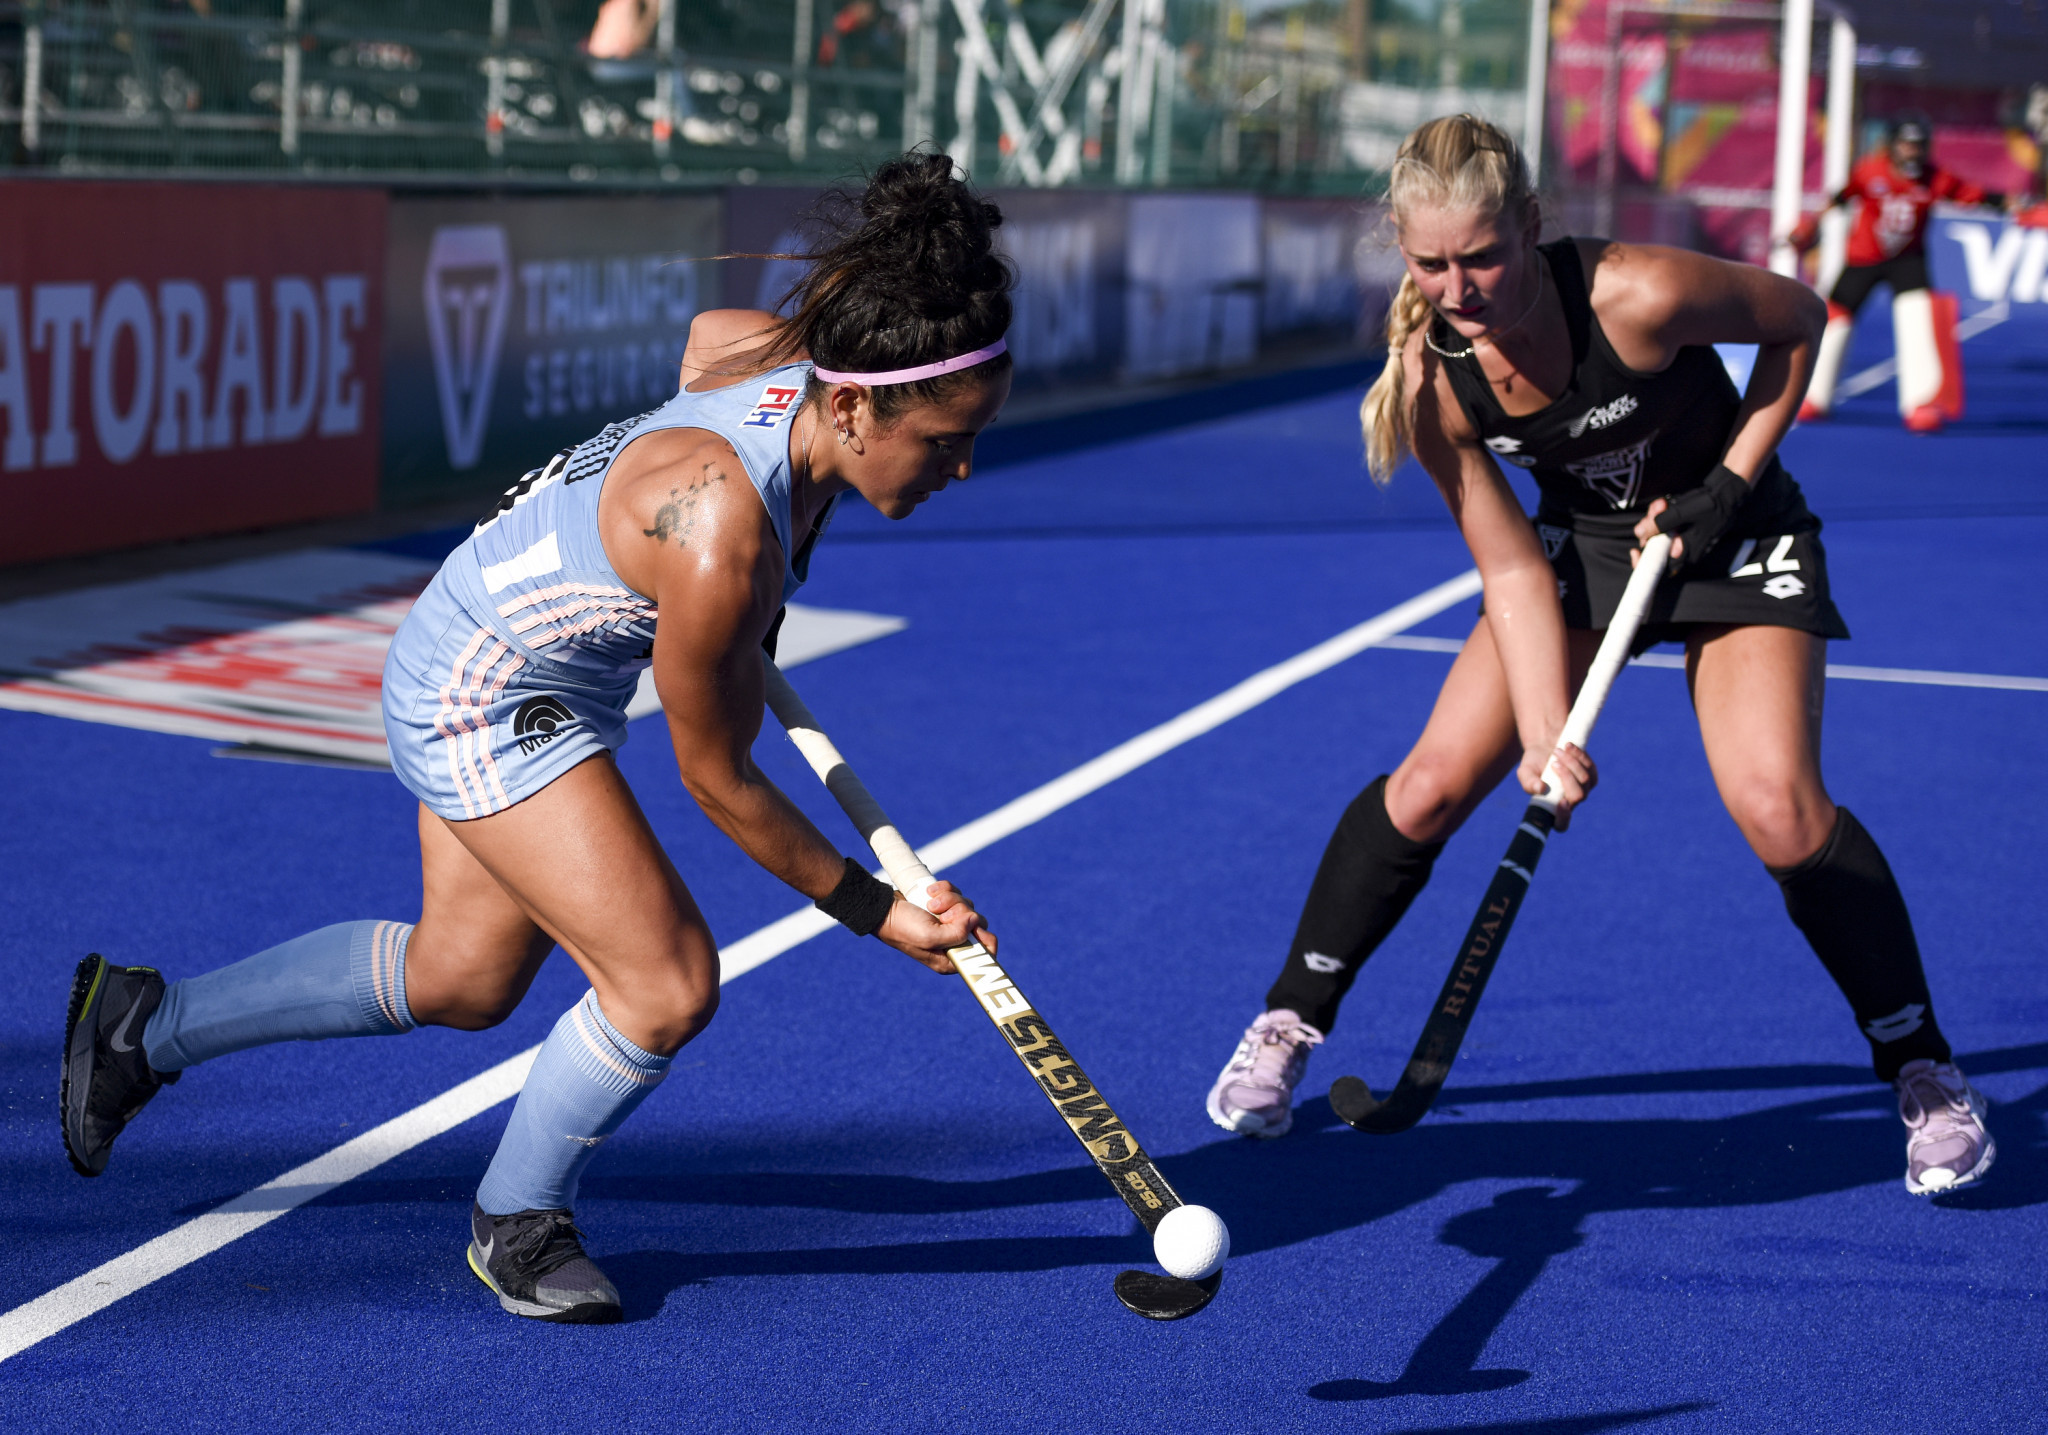 Argentinean hockey player María José Granatto is among the 75 Team Bridgestone athlete ambassadors to have been named ©Getty Images